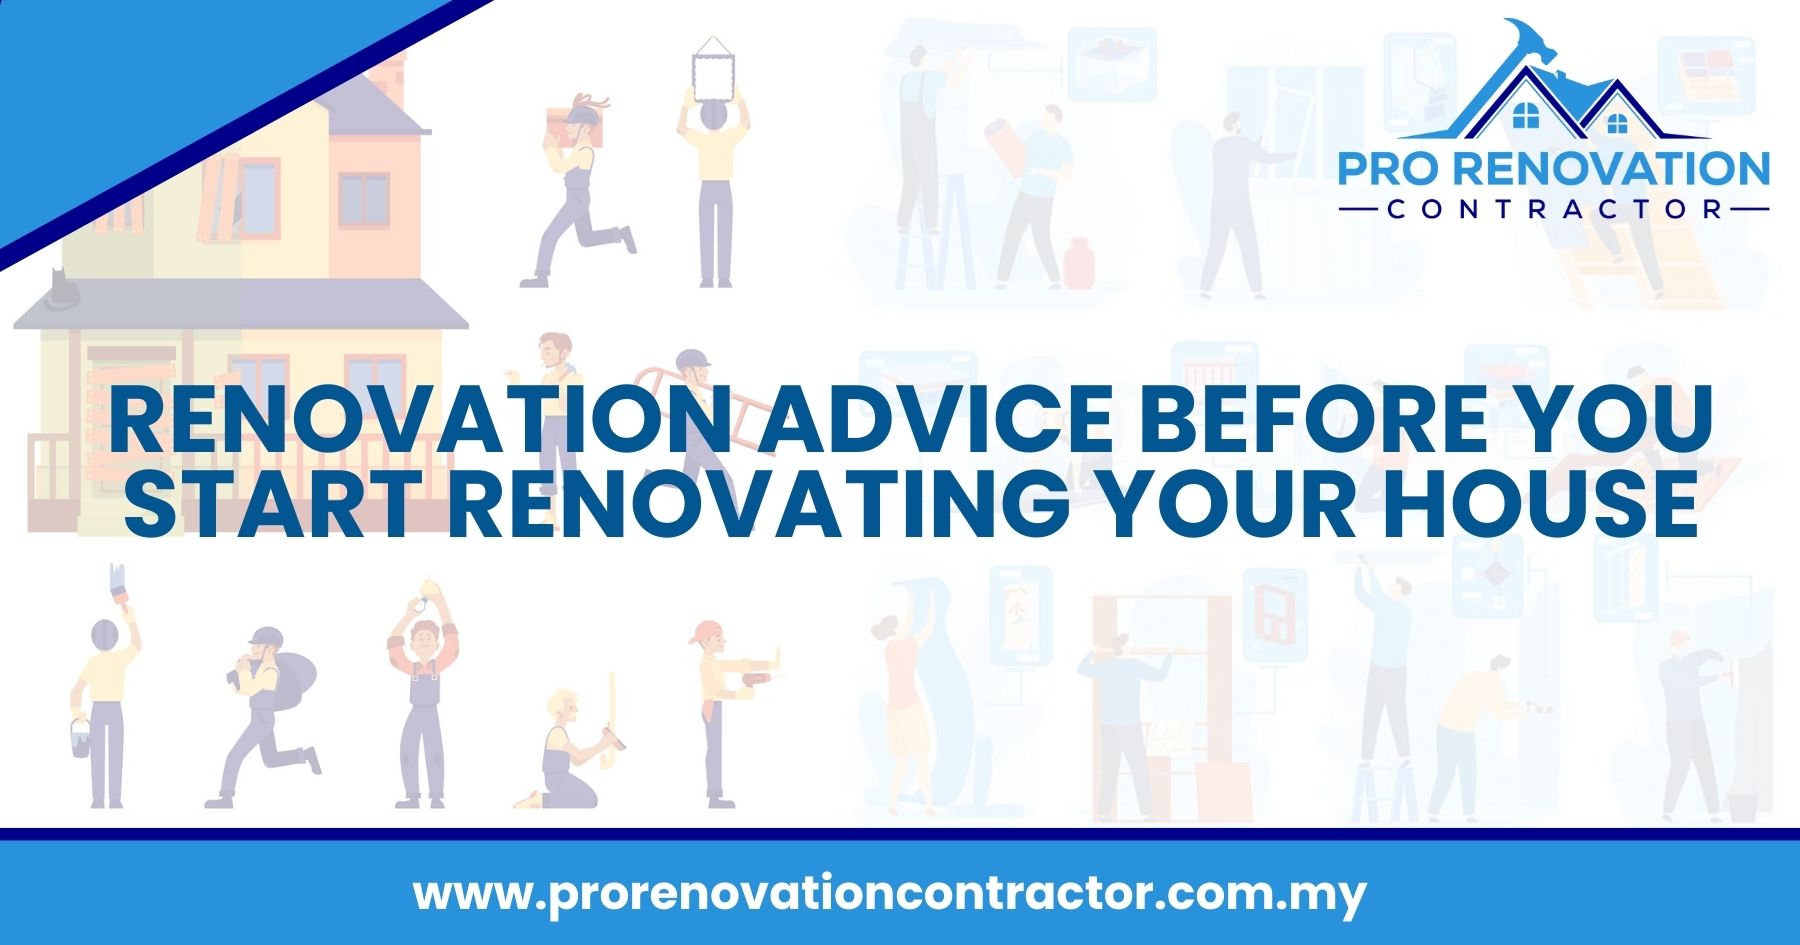 Renovation Advice Before You Start Renovating Your House